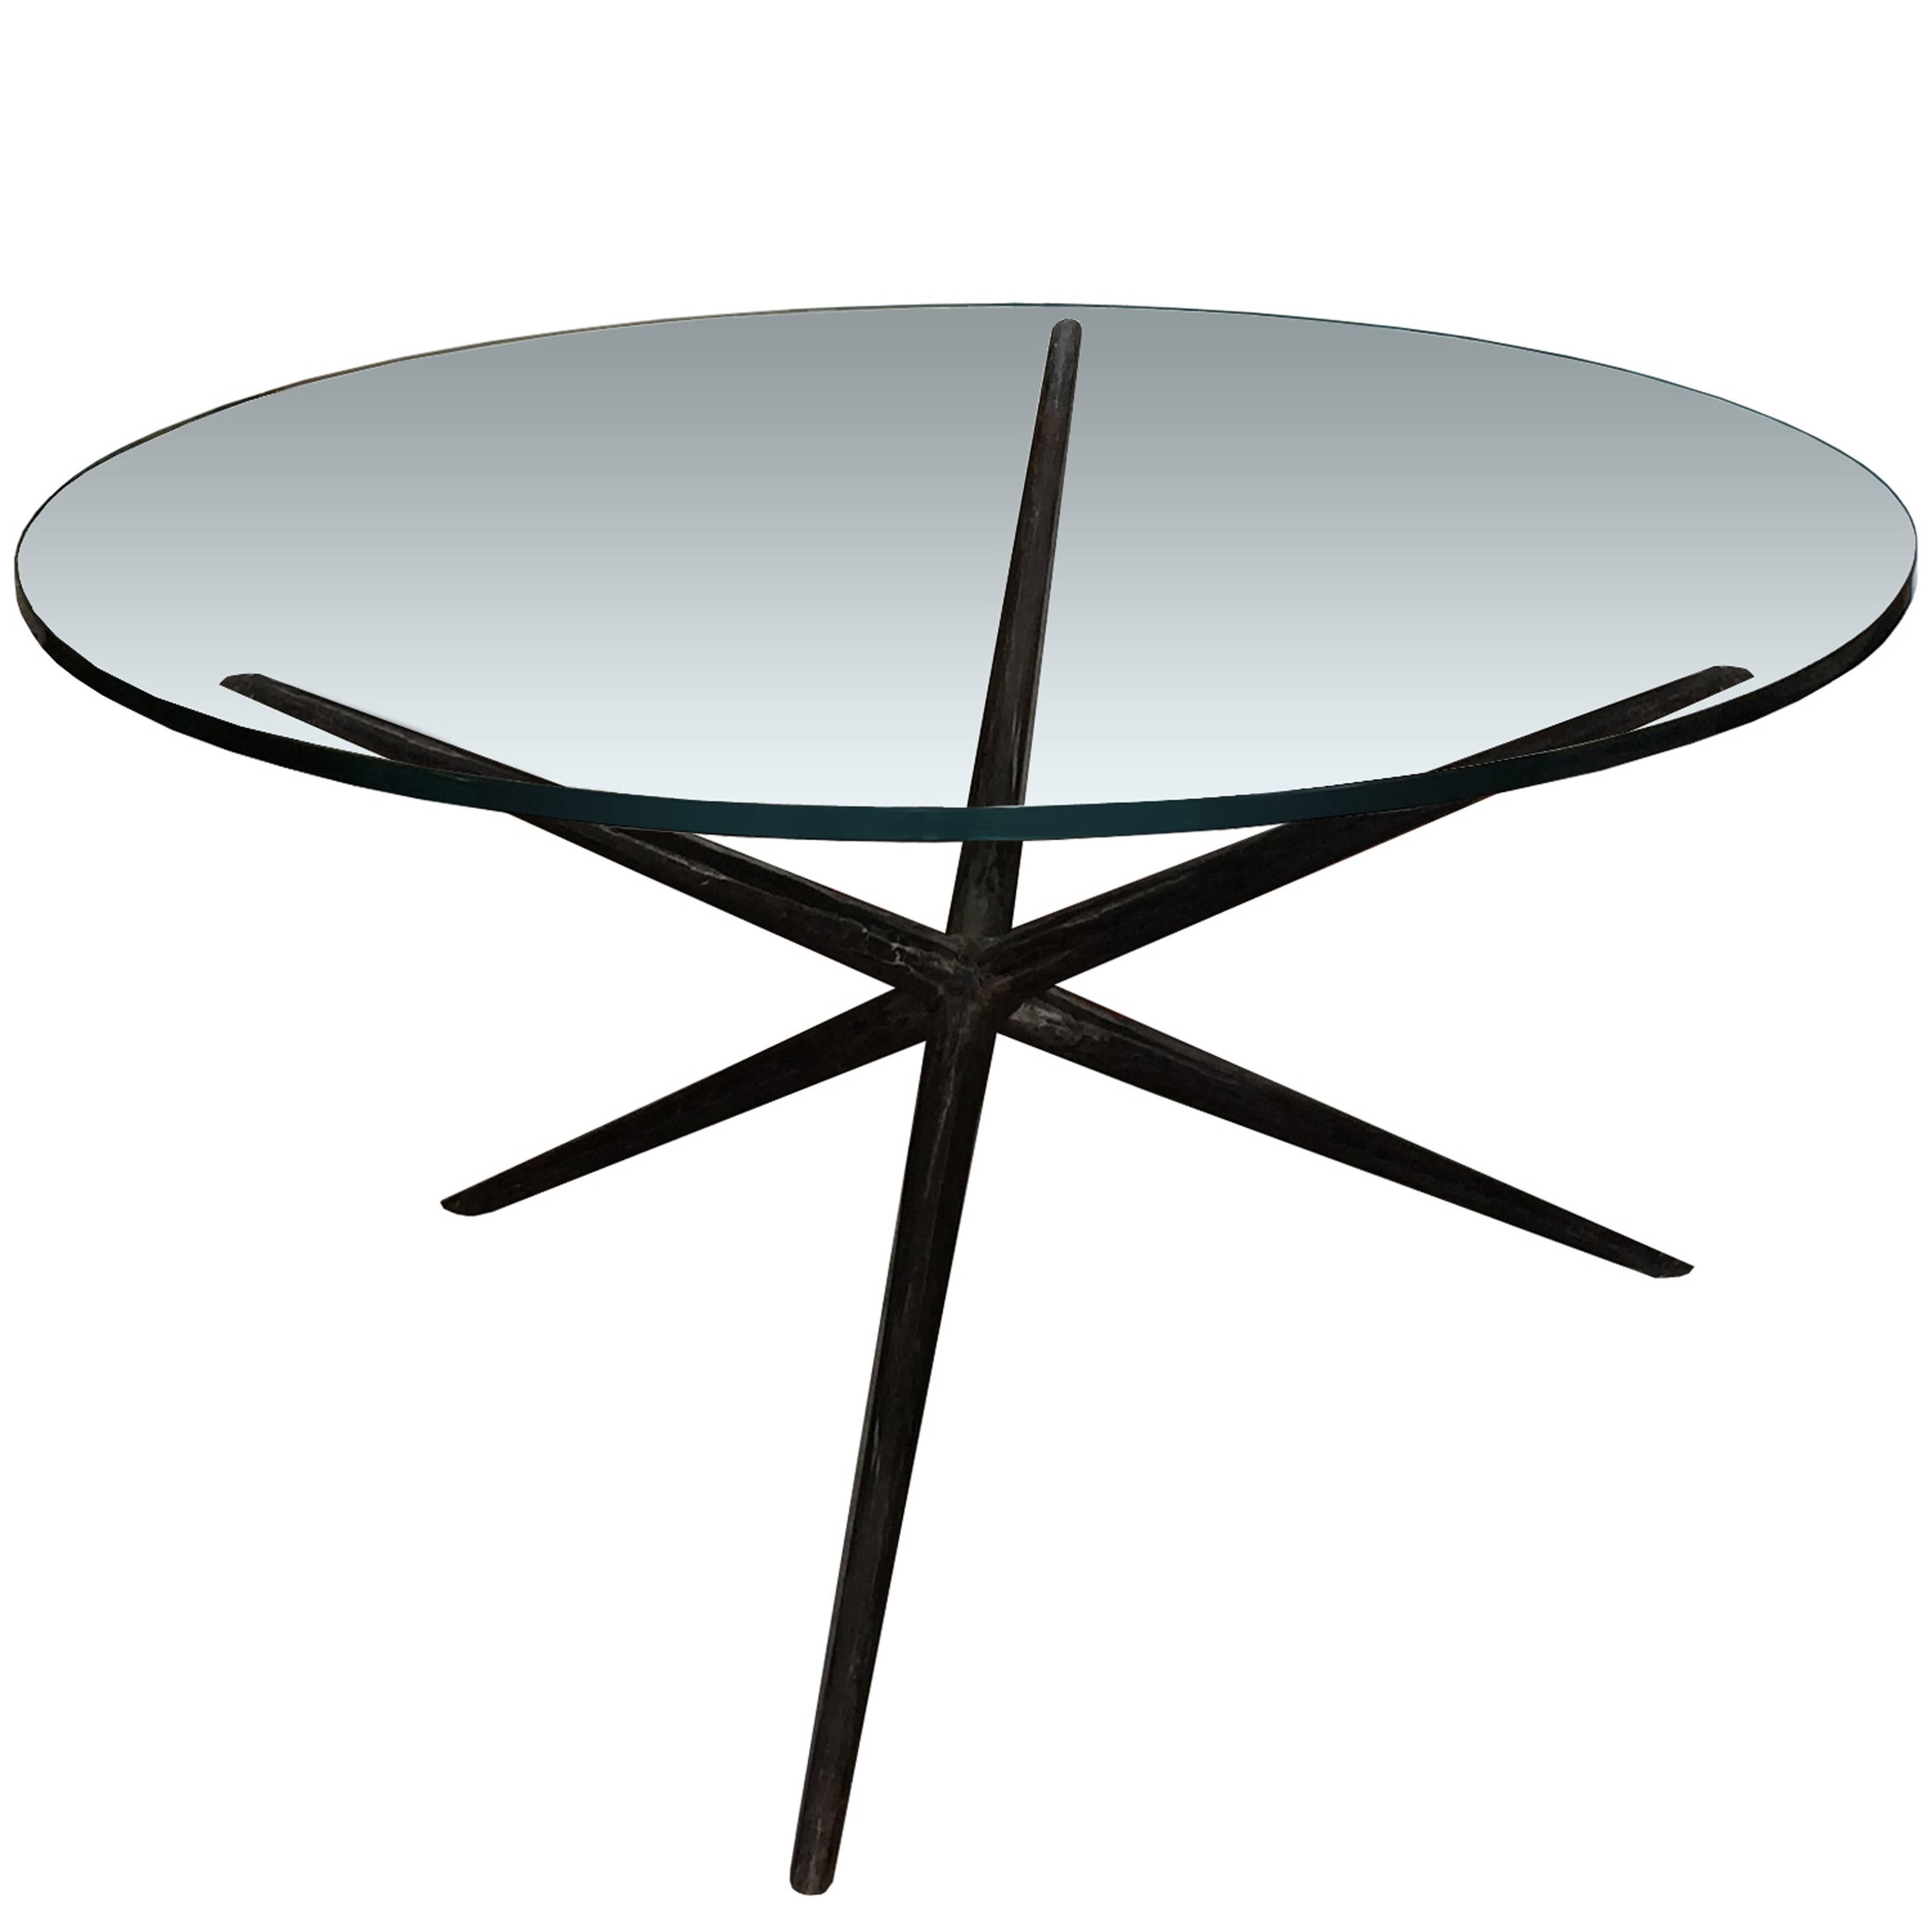 Blackened Hammered Steel Dining Table Base For Sale